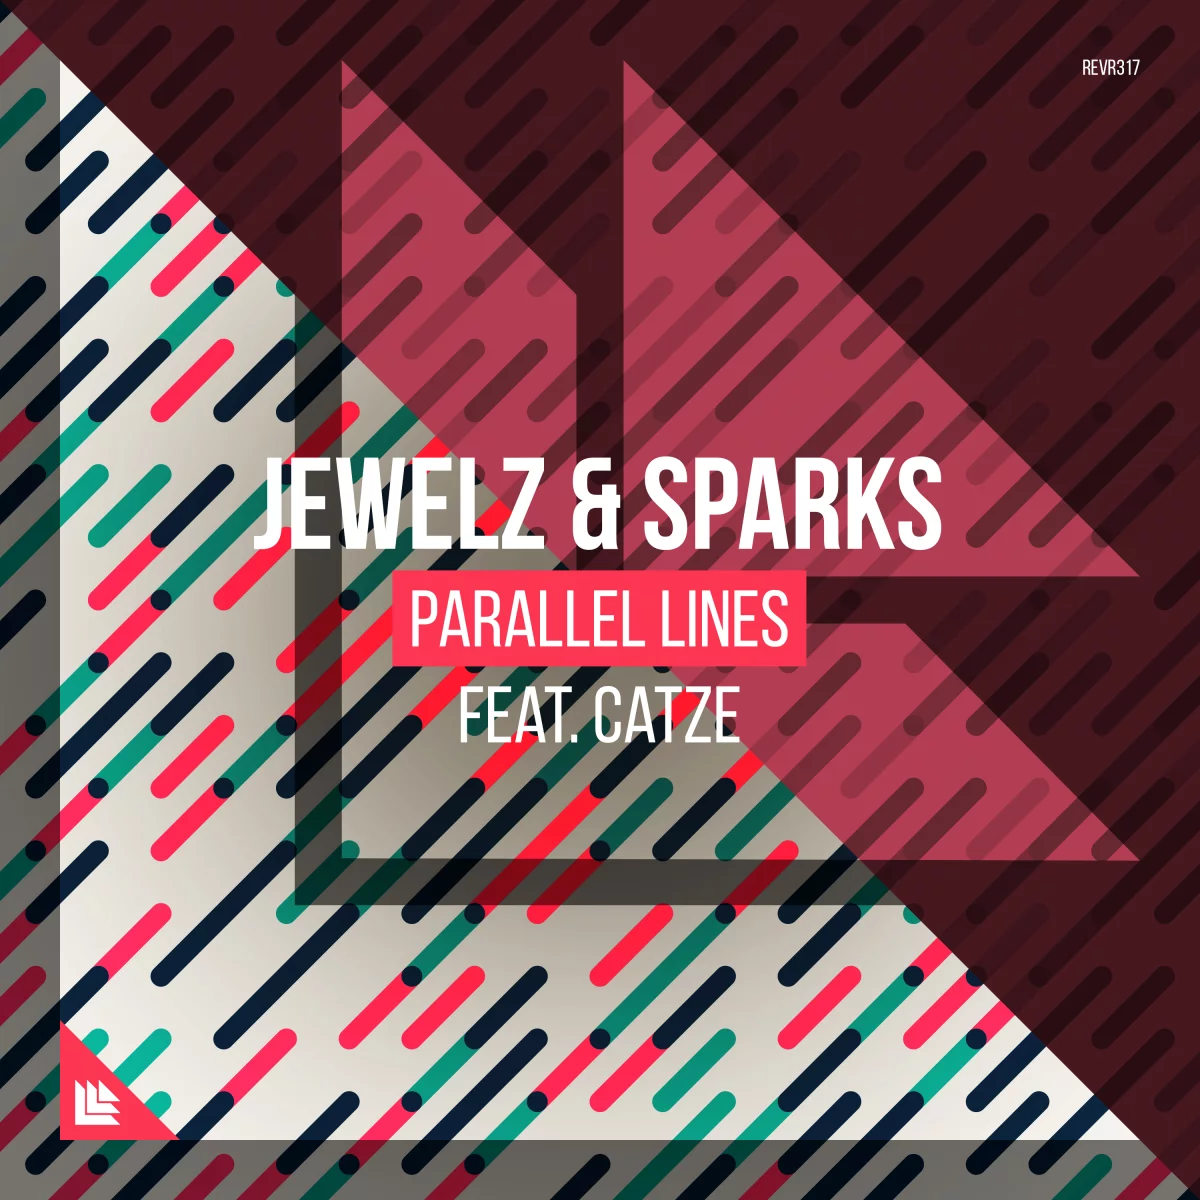 Parallel Lines - Jewelz & Sparks⁠ feat. CATZE